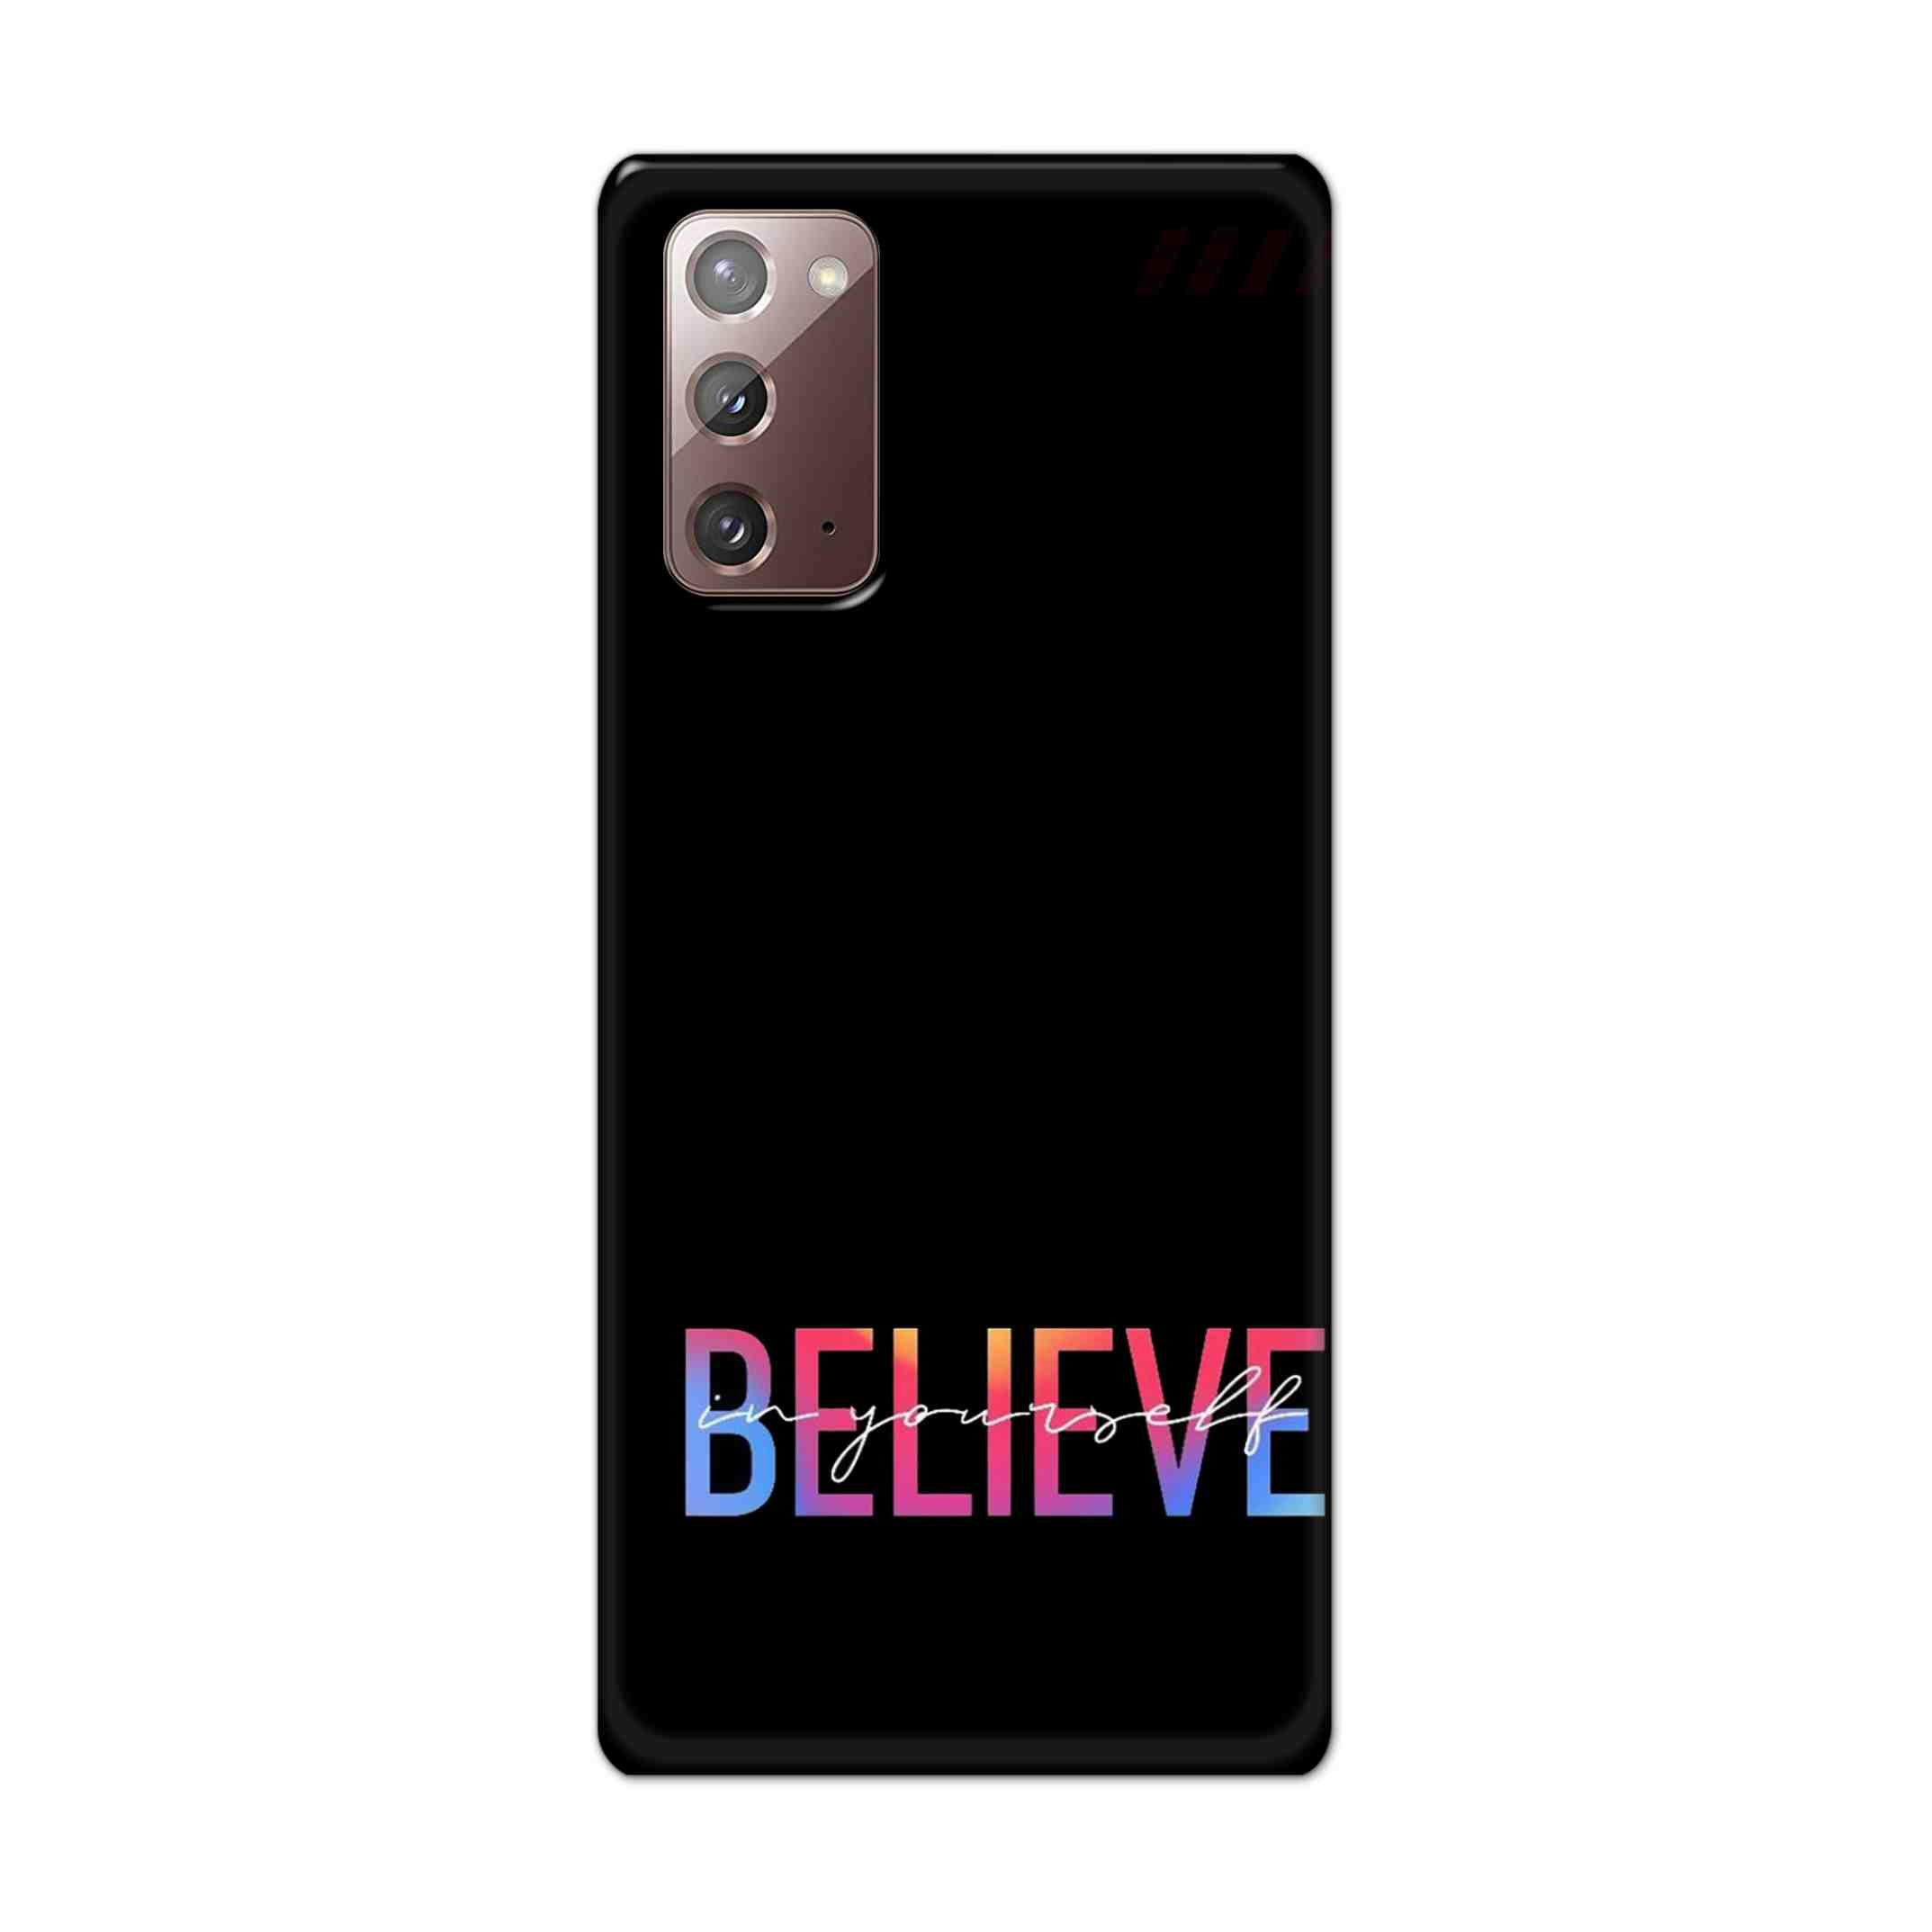 Buy Believe Hard Back Mobile Phone Case Cover For Samsung Galaxy Note 20 Online